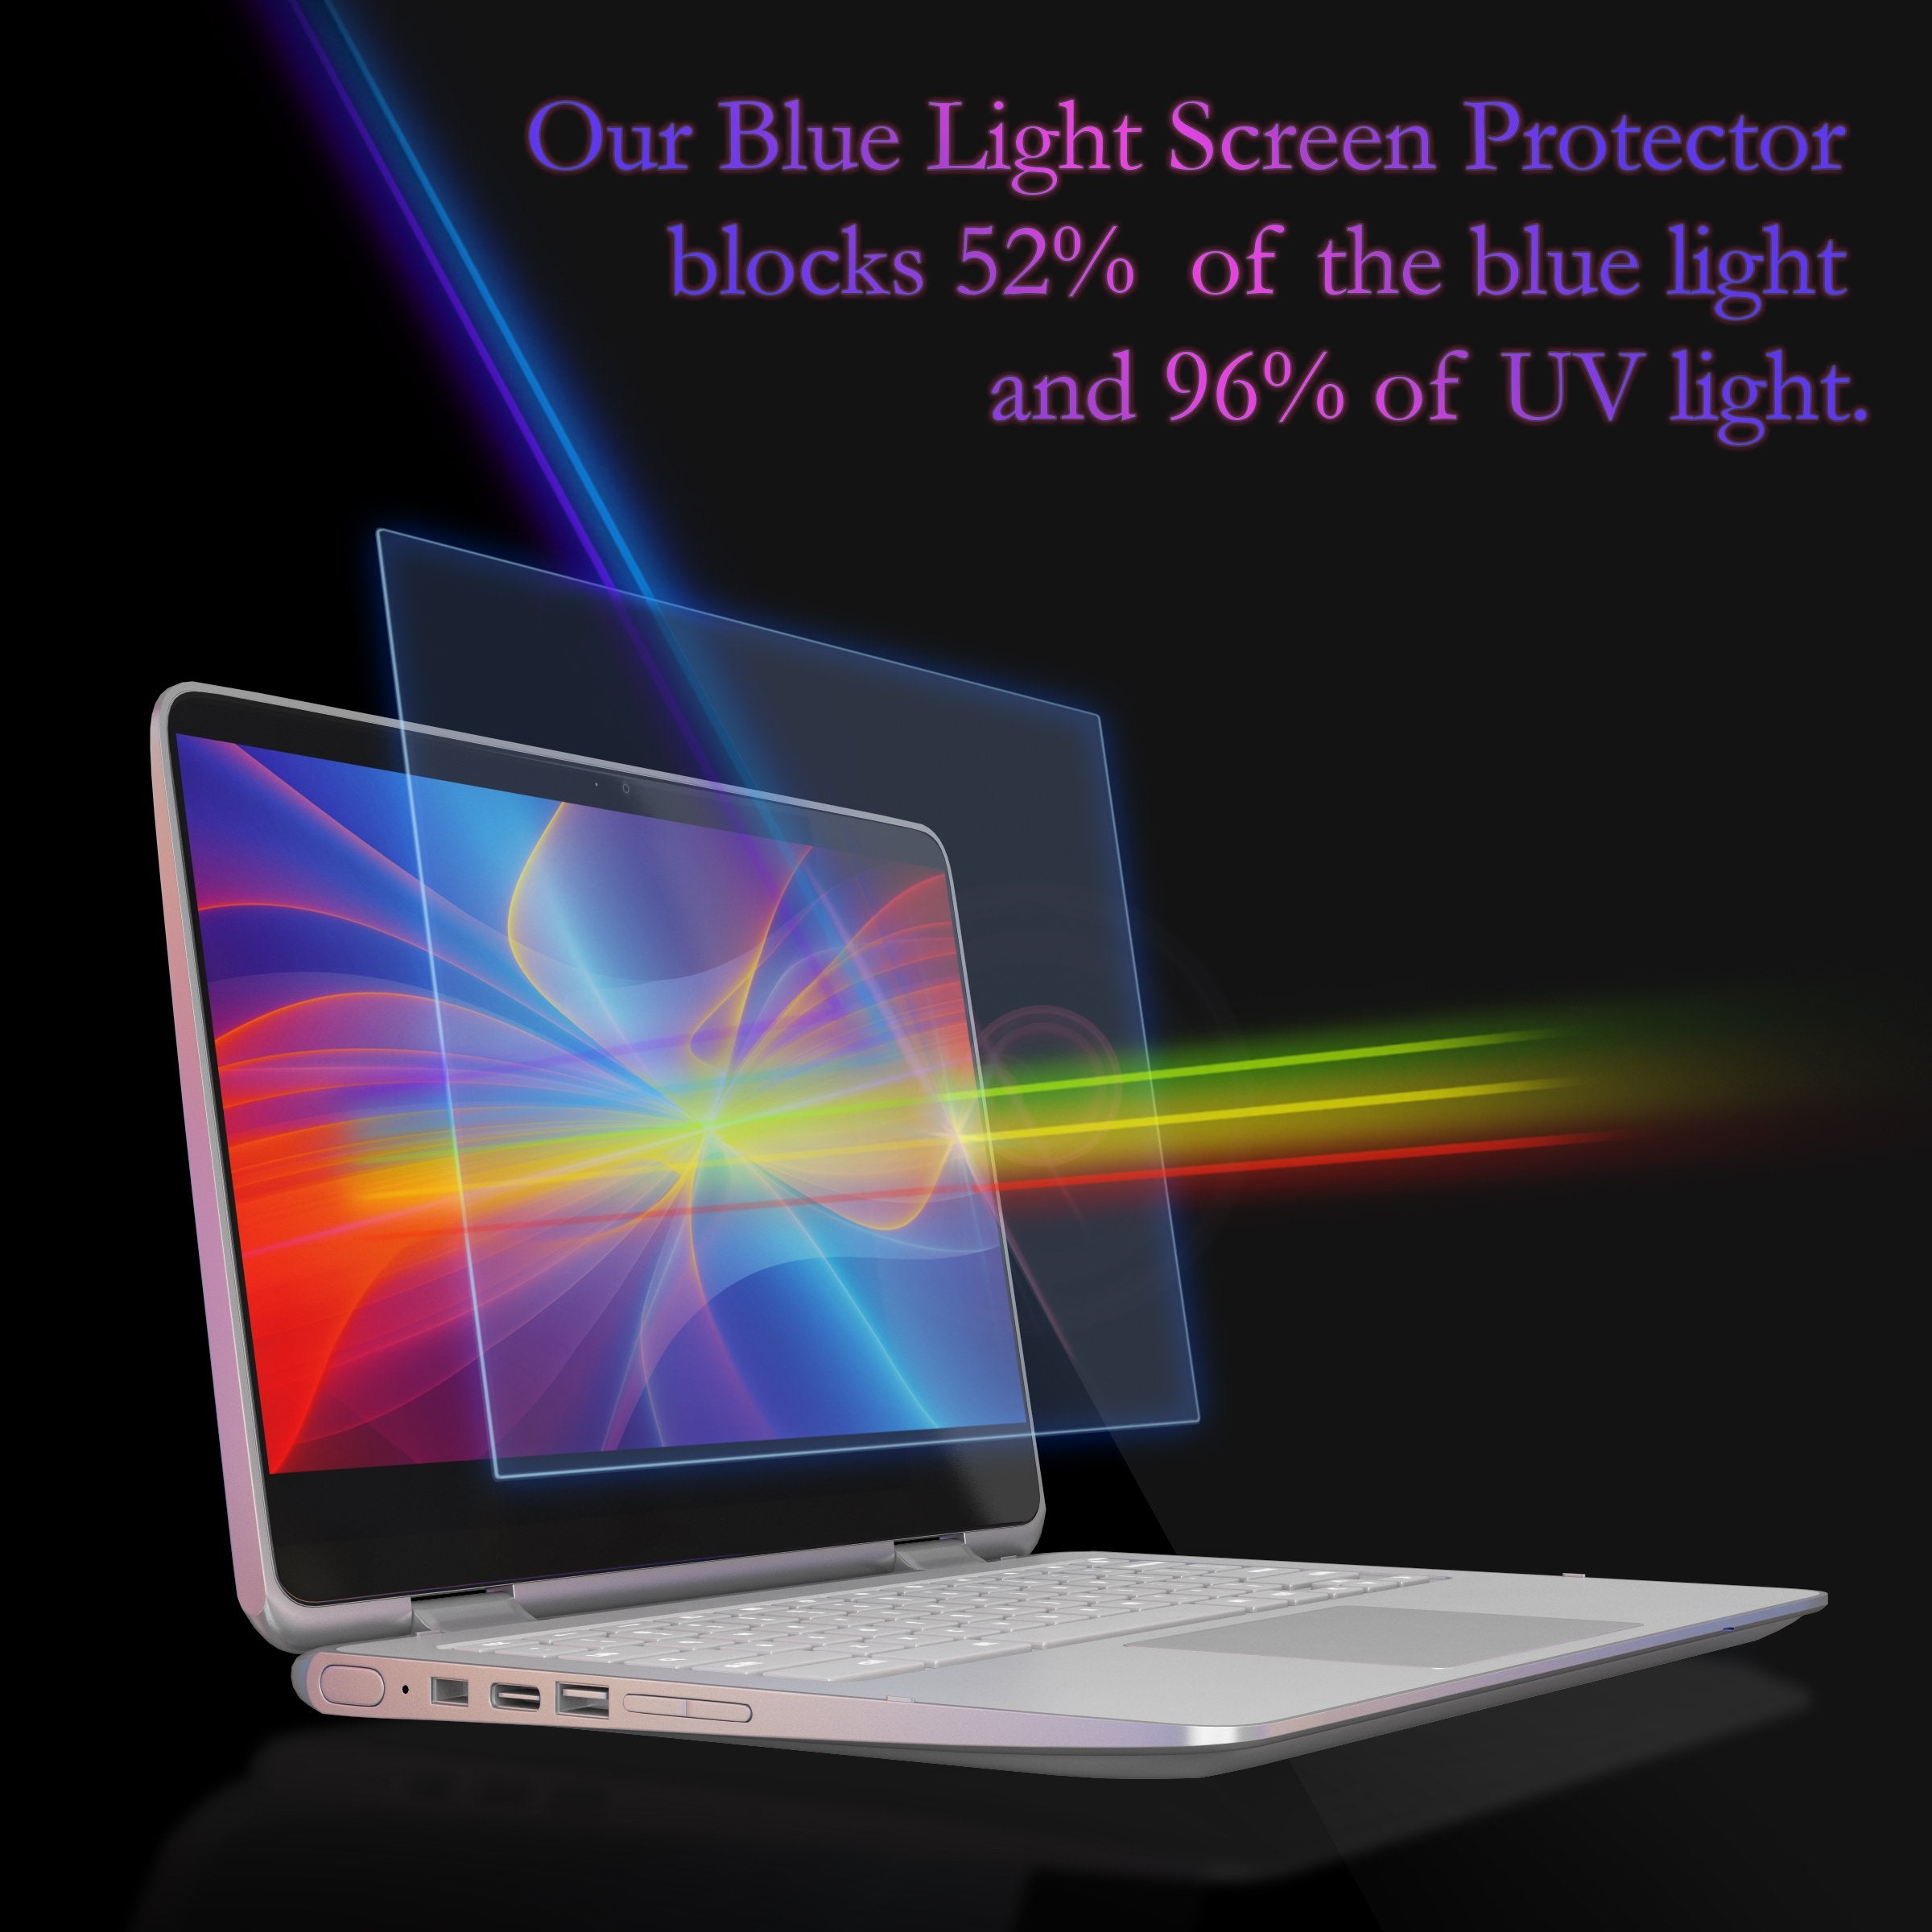 Anti Blue Light Screen Protector (3 Pack) for Desktop Monitor. Filter Out Blue Light and Relieve Computer Eye Strain to Help You Sleep Better